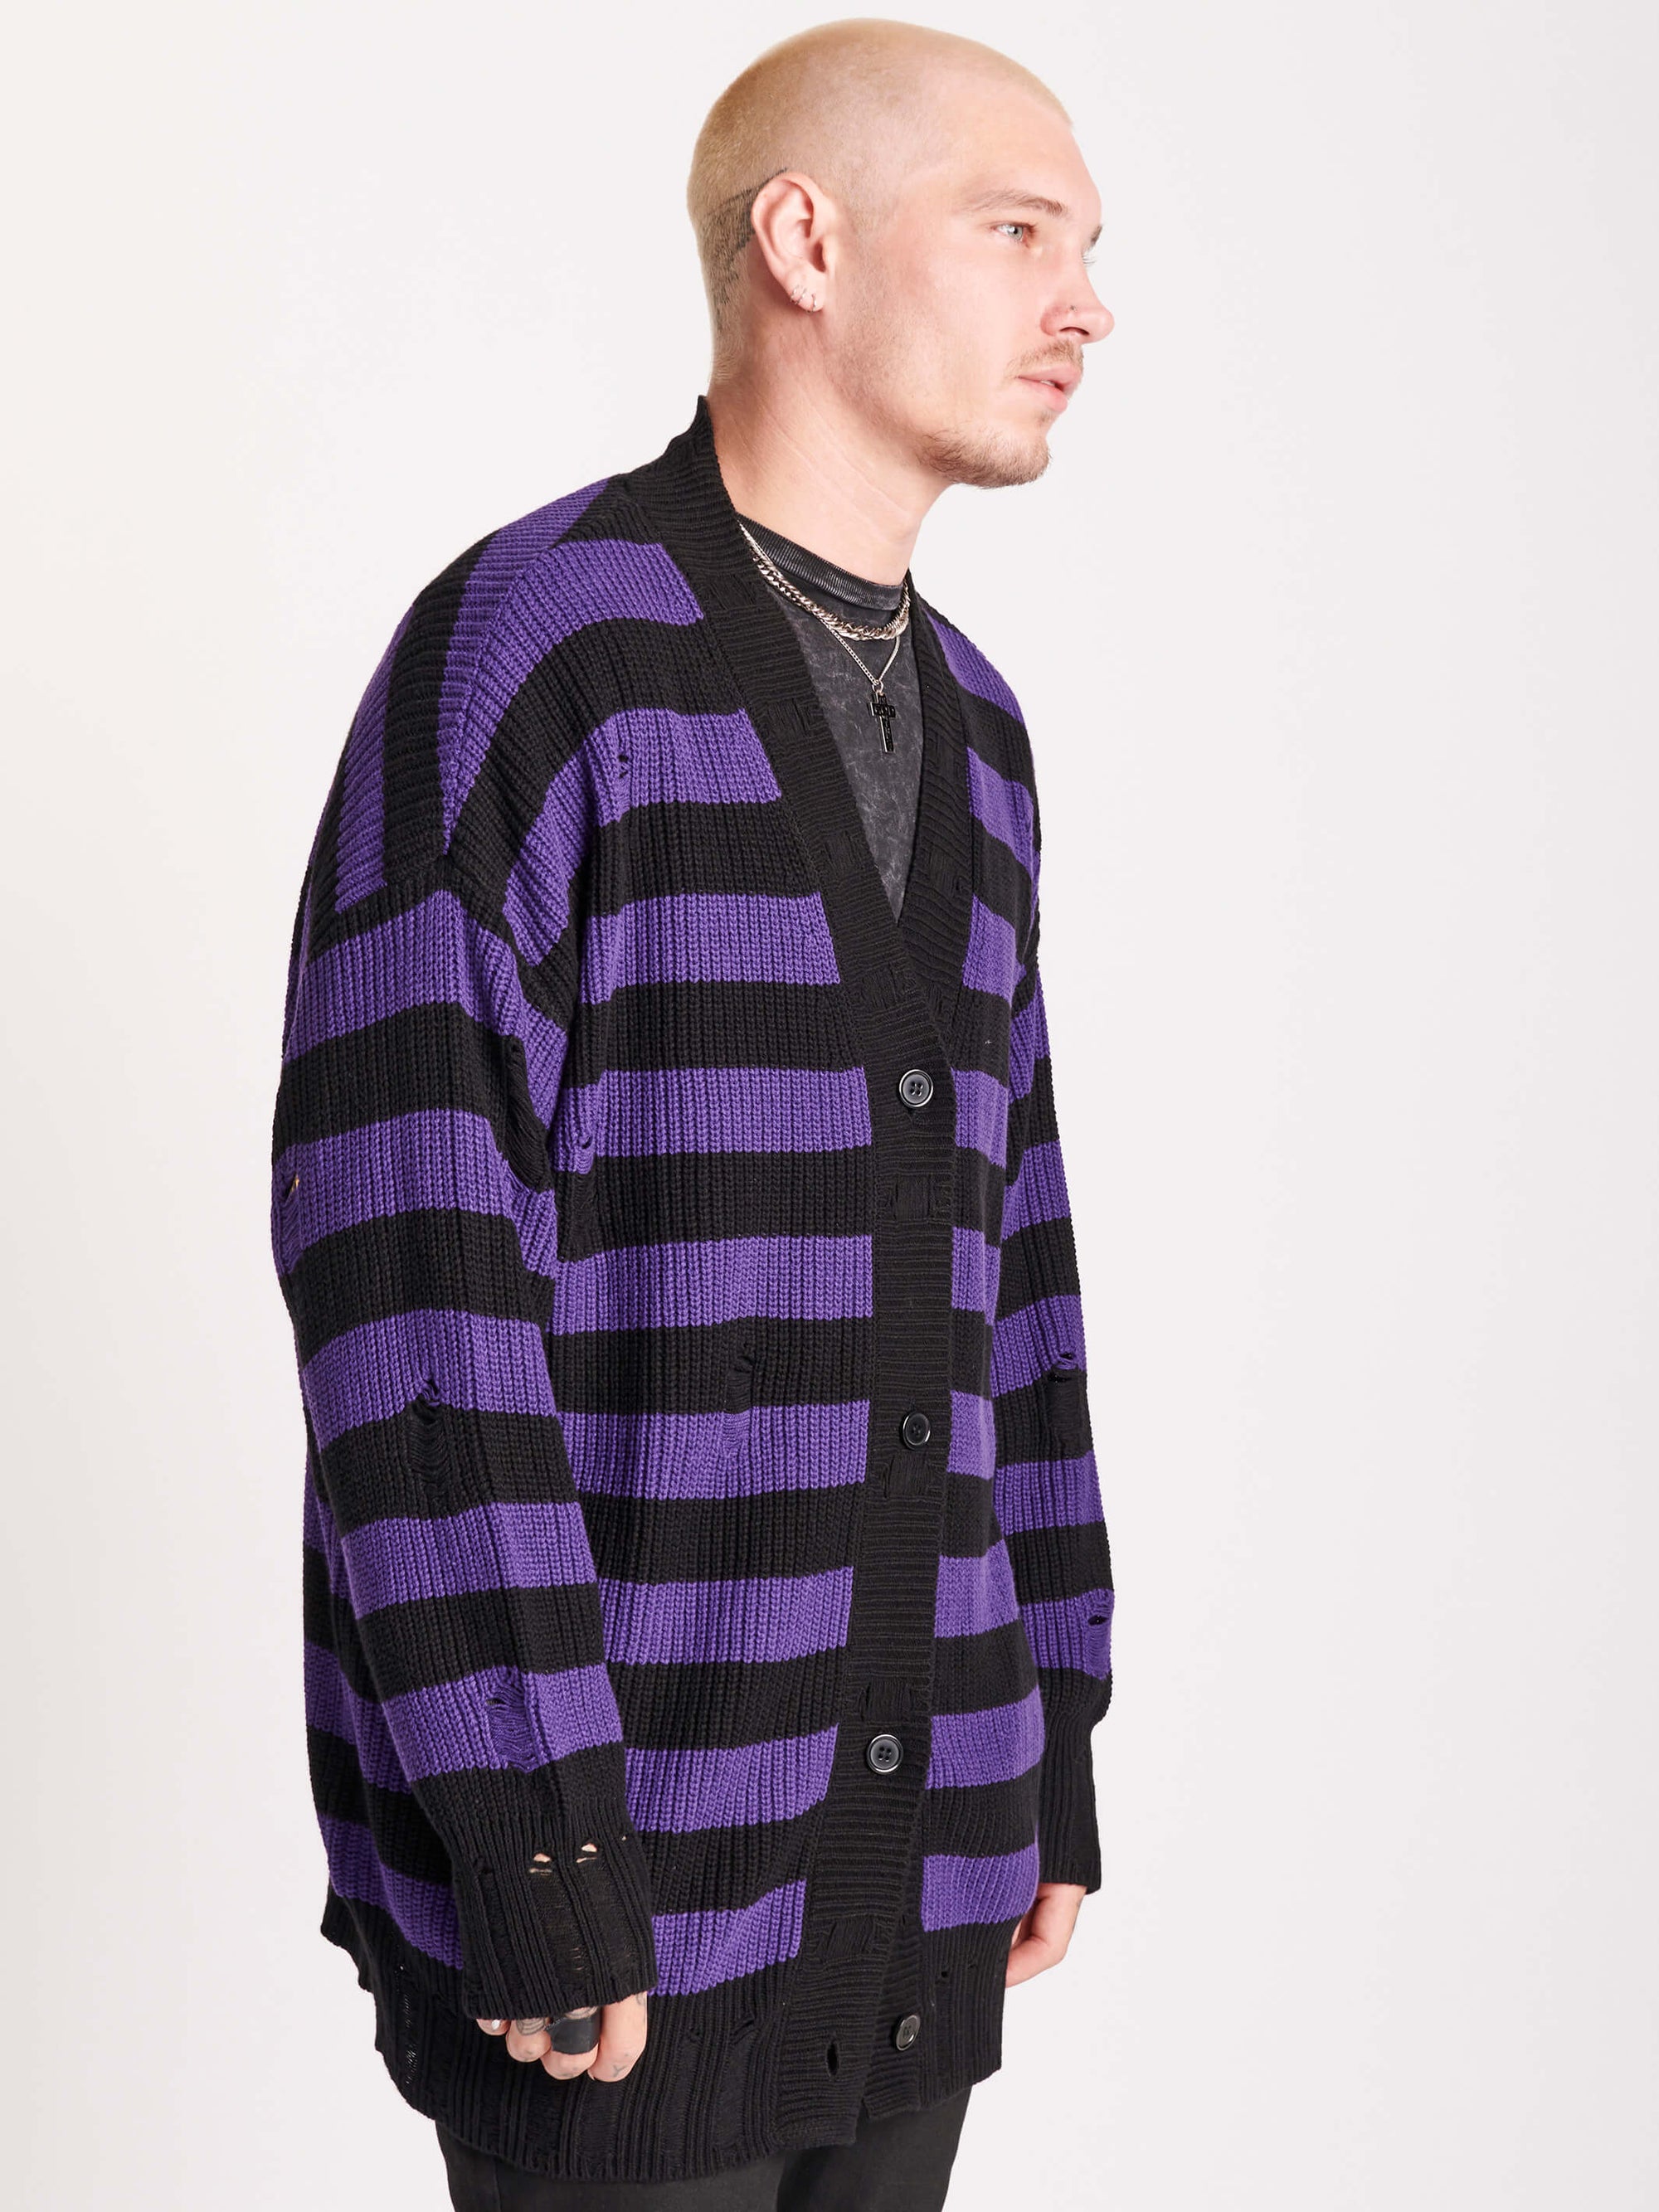 purple and black stripw cardigan with drop stitch detail throughout